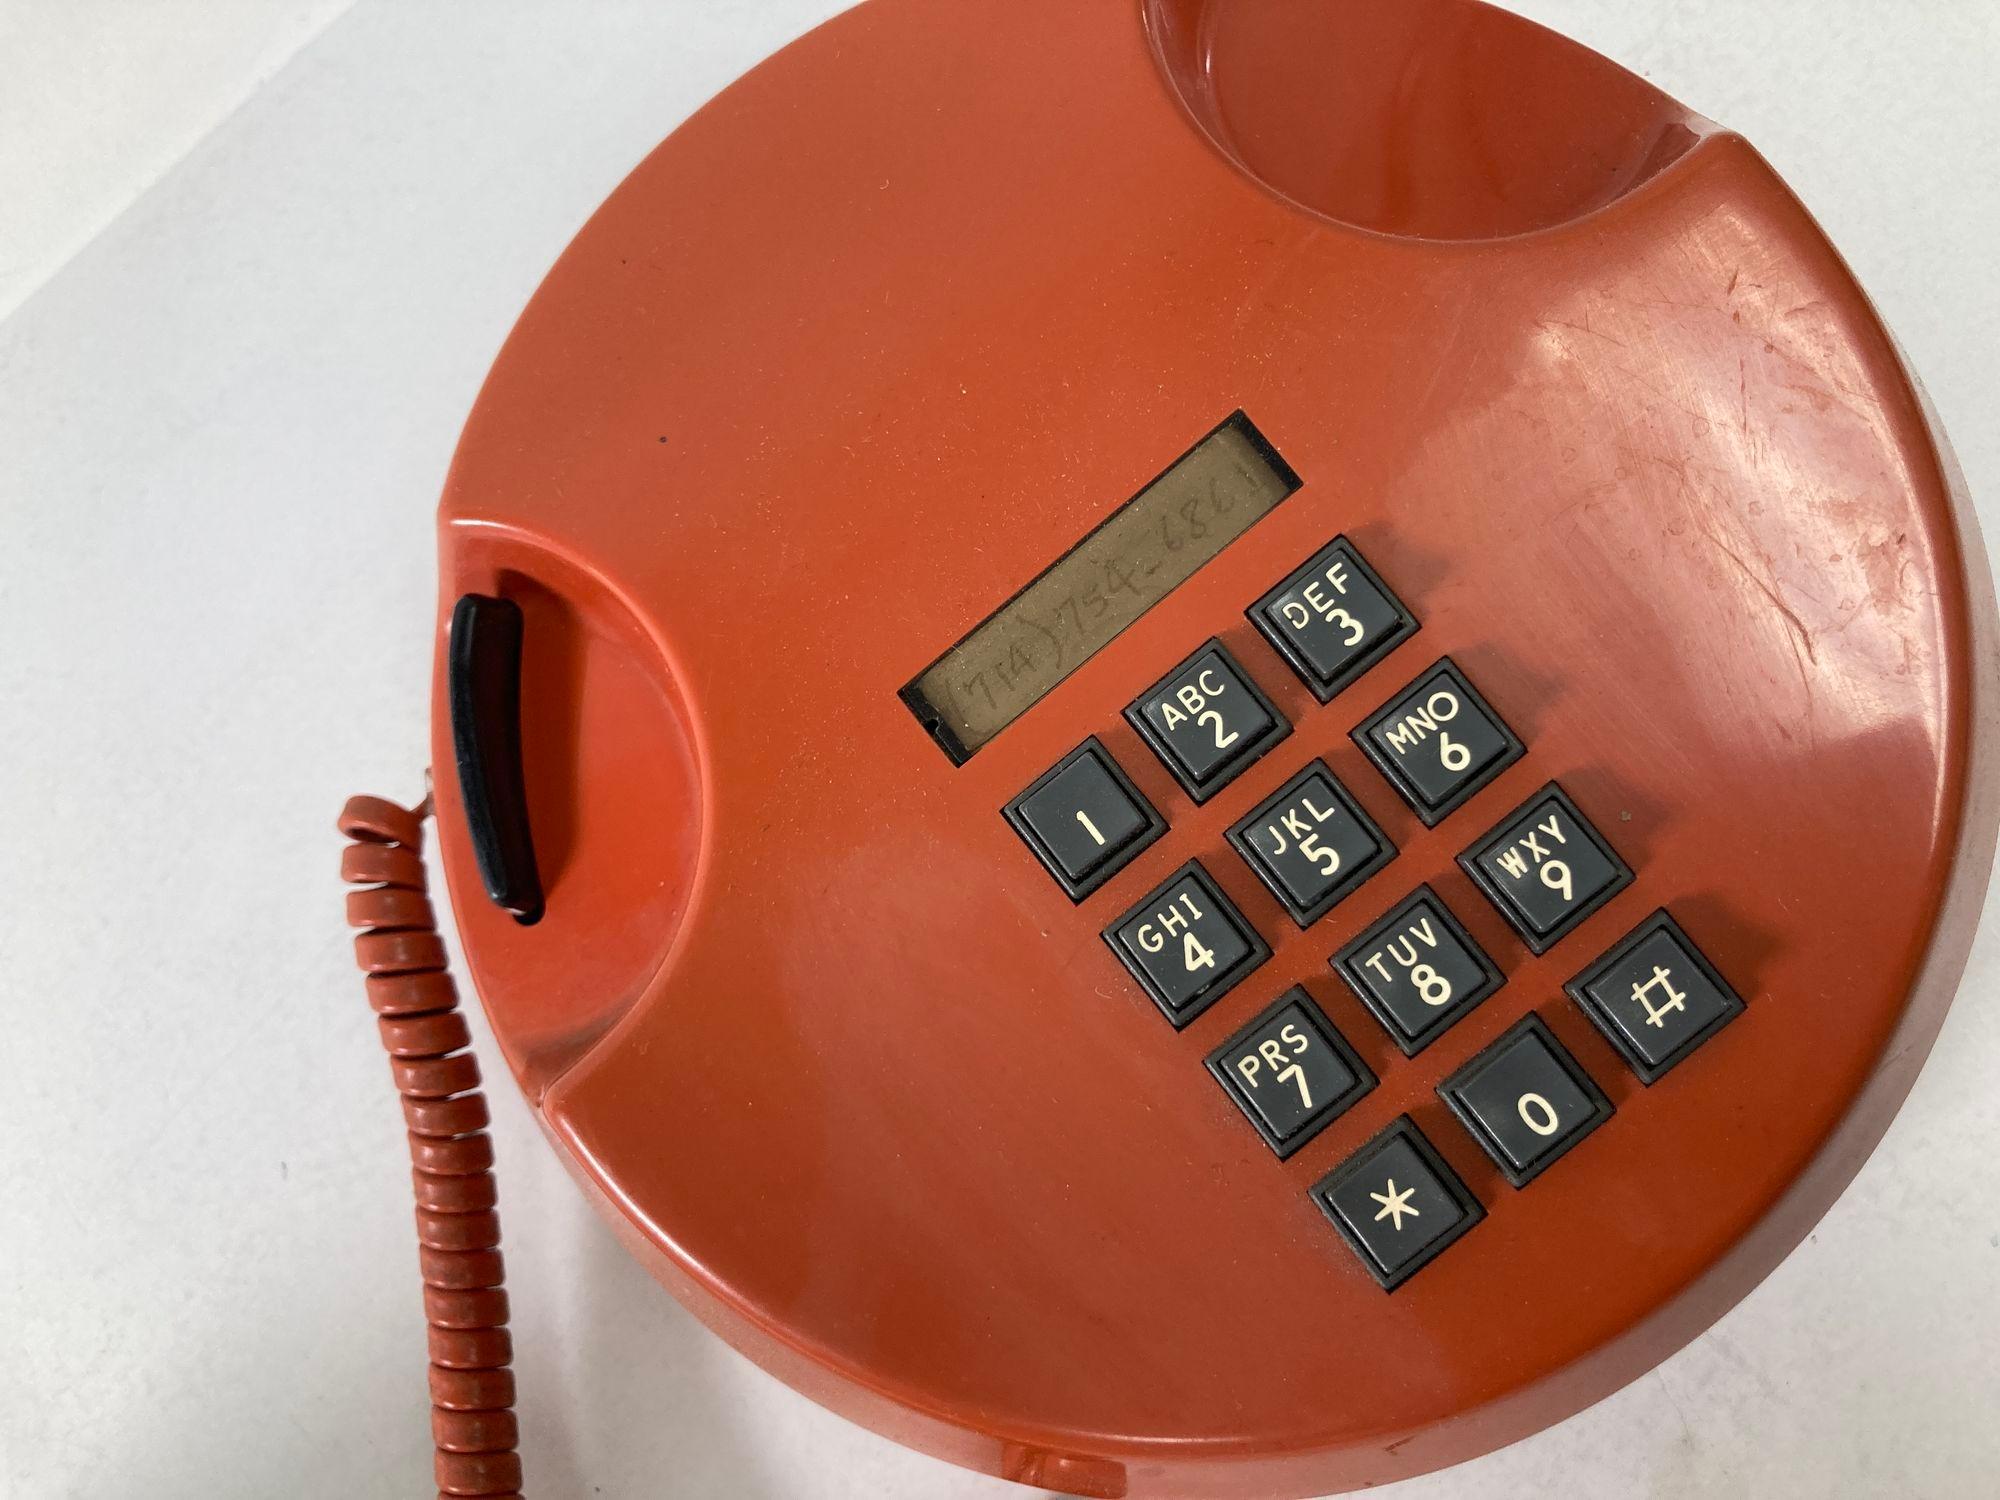 20th Century Vintage Retro Push-Button Round Telephone Burnt Orange Color from the, 70s